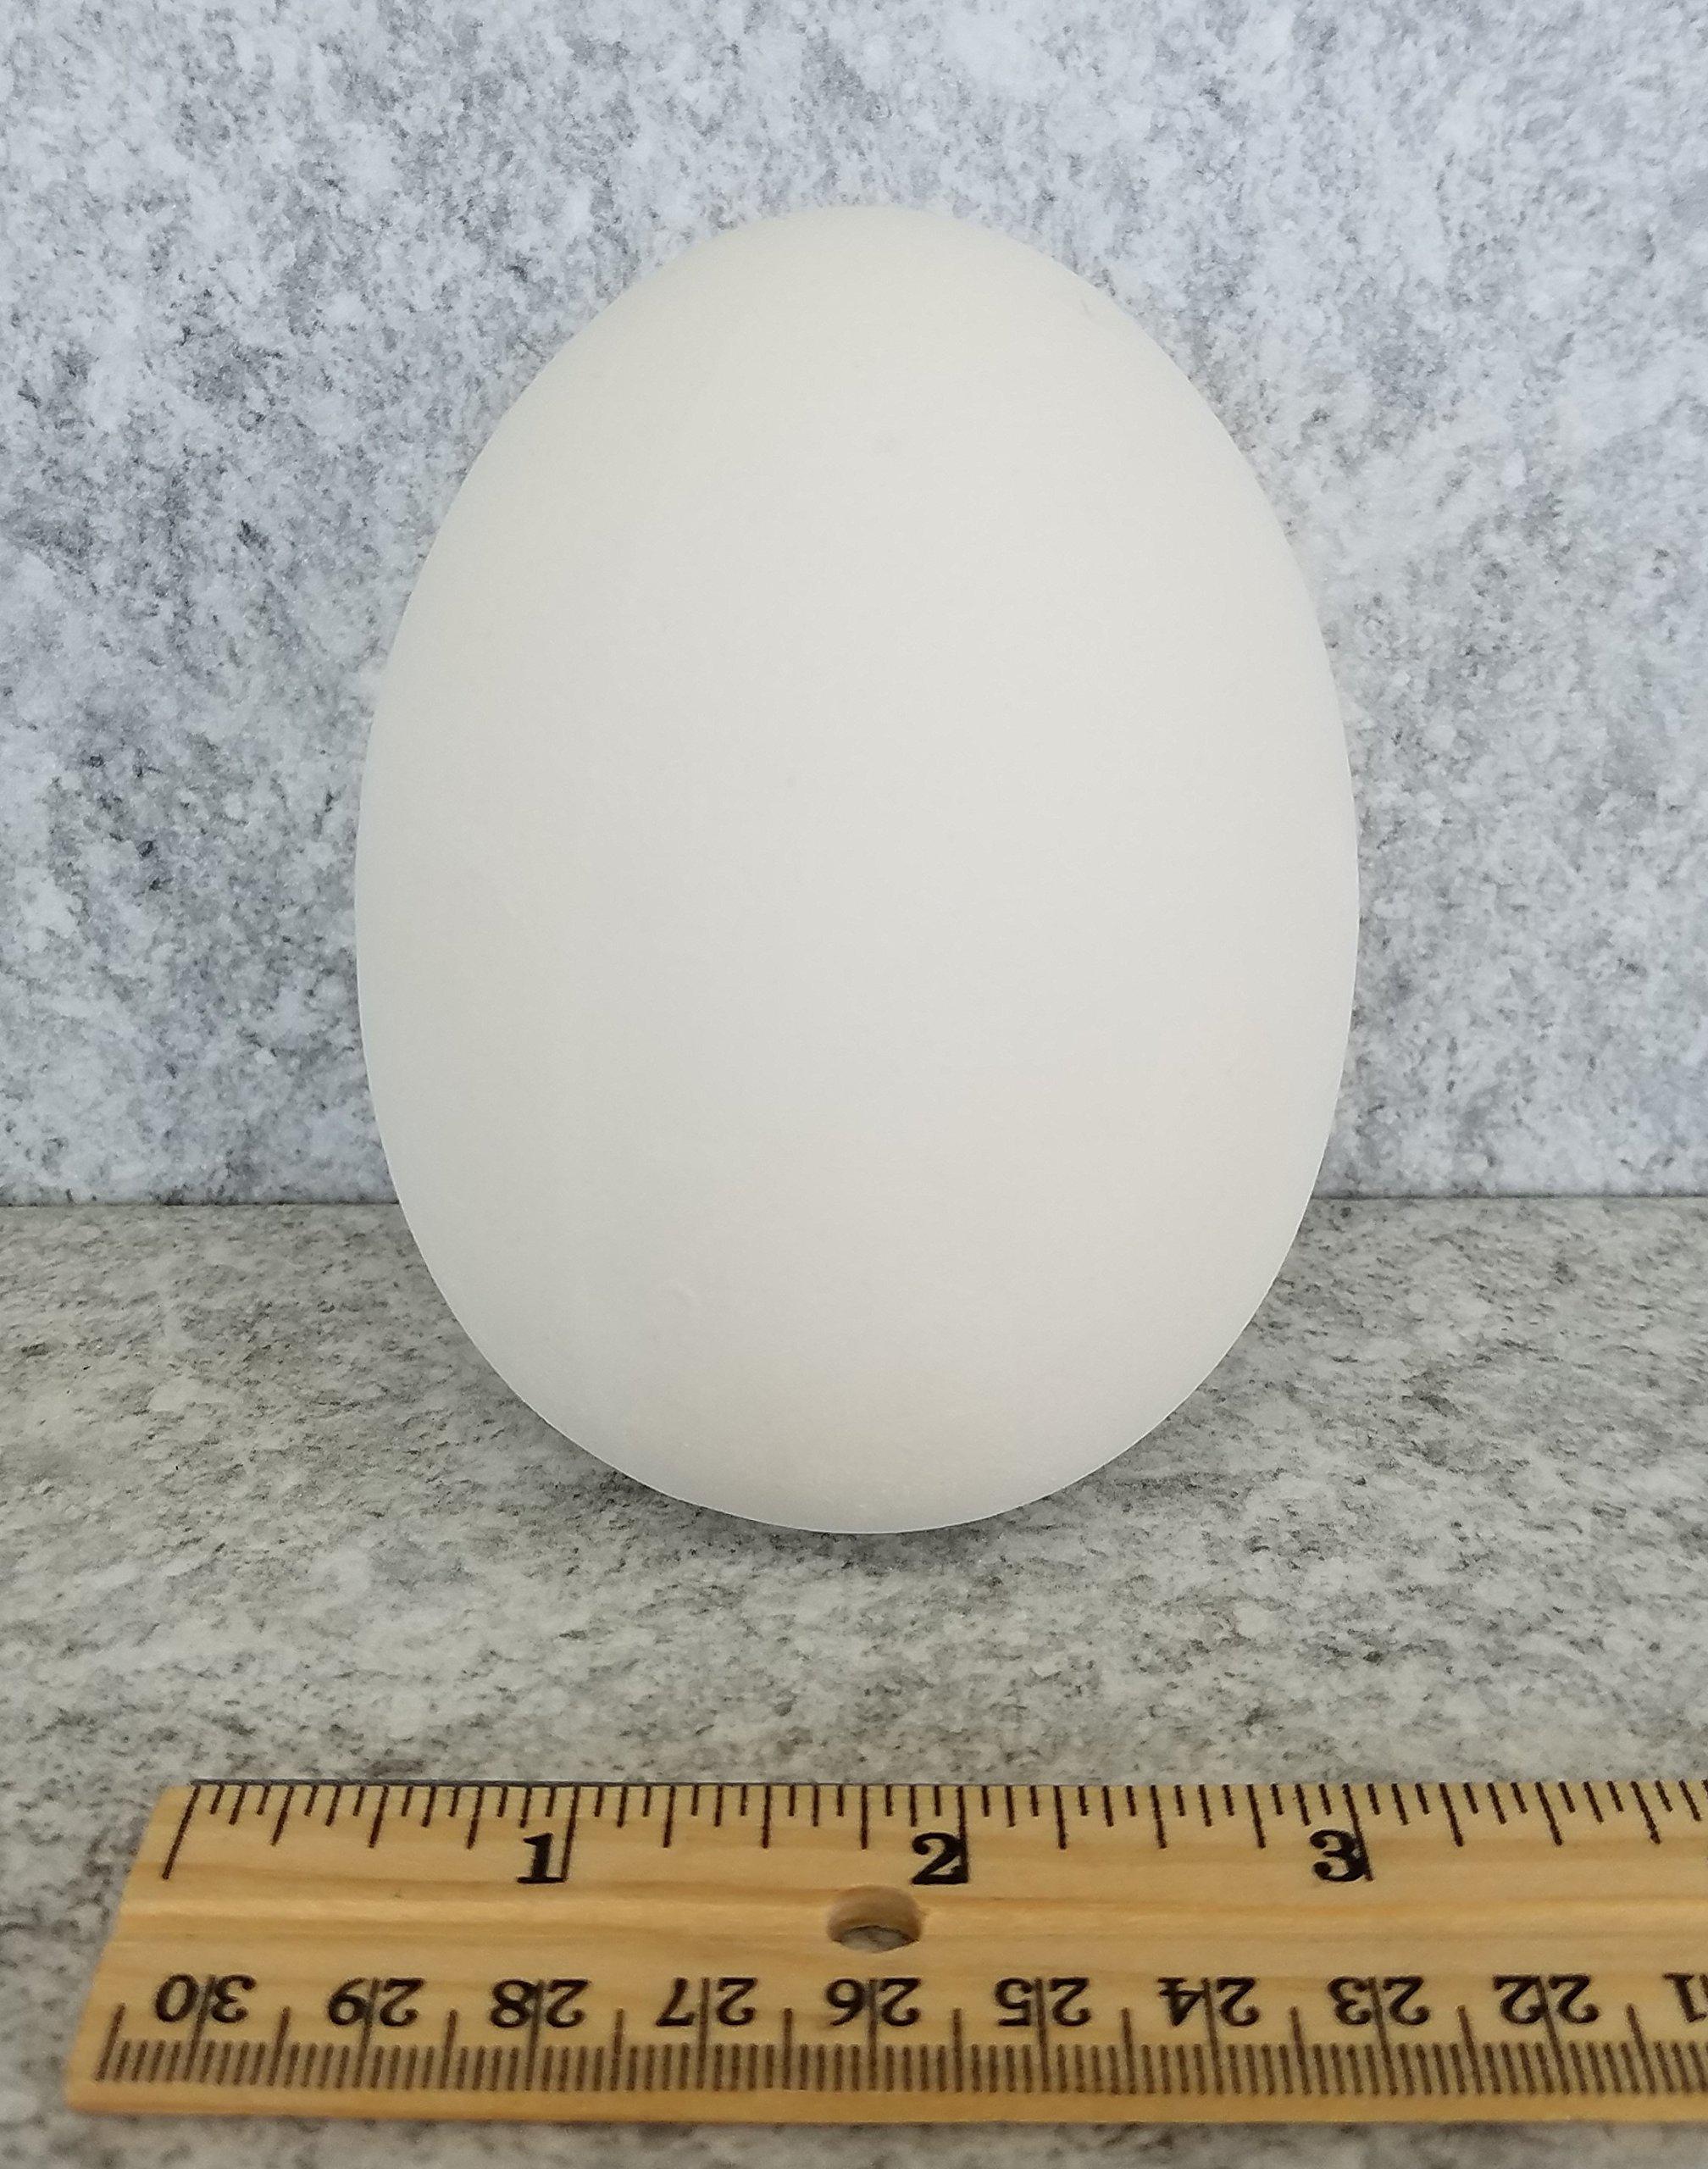 bisque - large egg 2.75w x 3.75h (unpainted, ready for glaze)